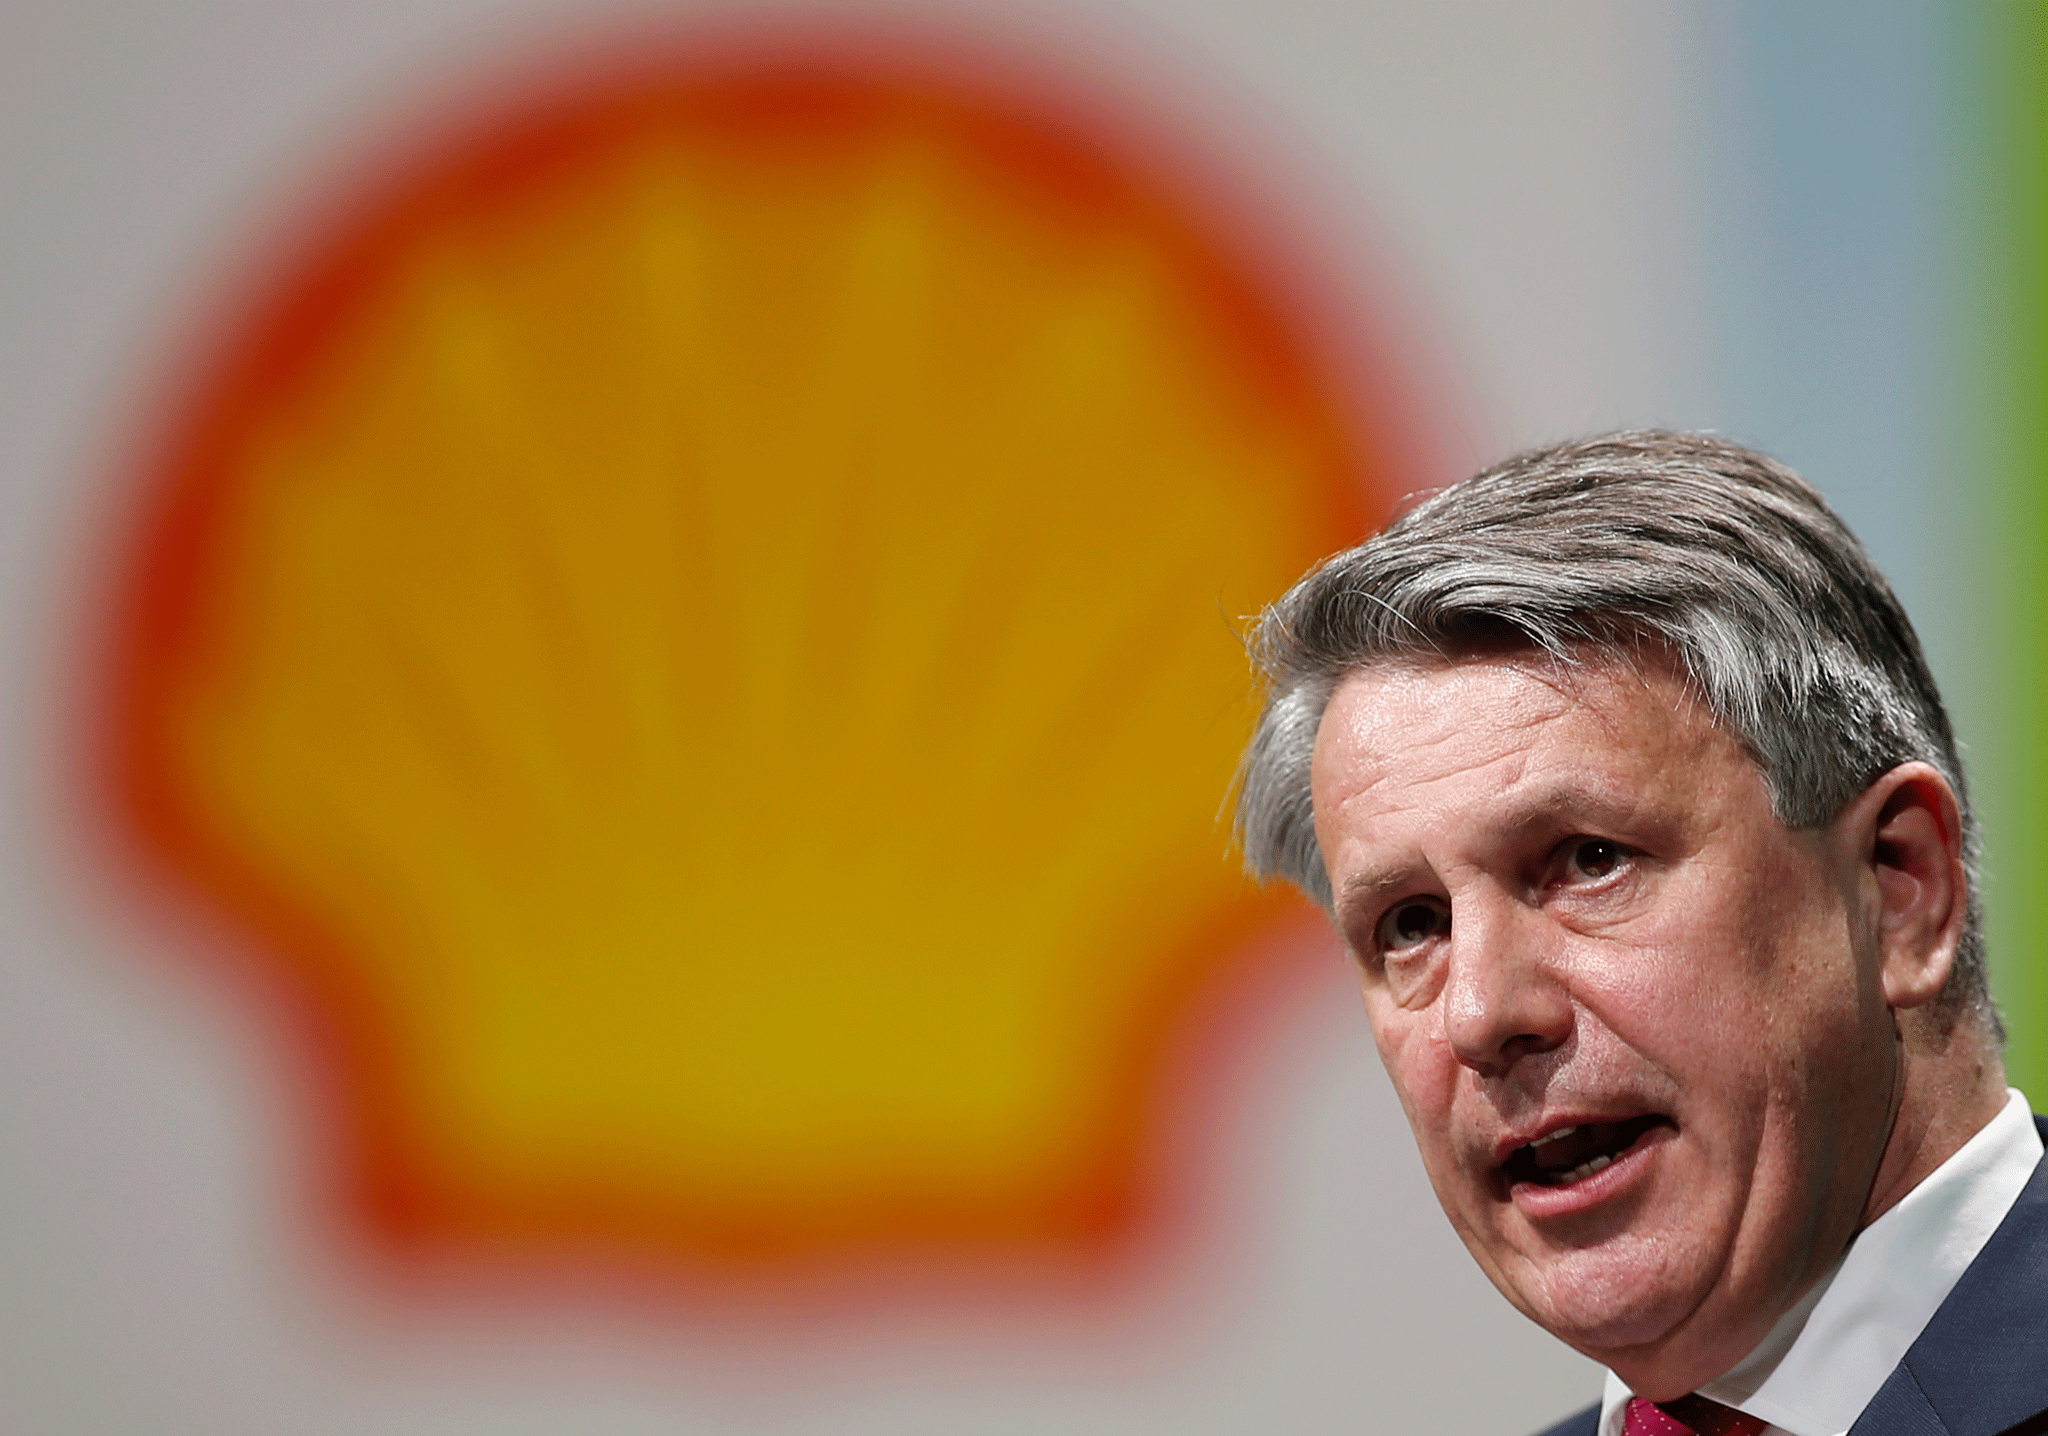 Shell has been able to generate profit with the oil price at about $50 a barrel